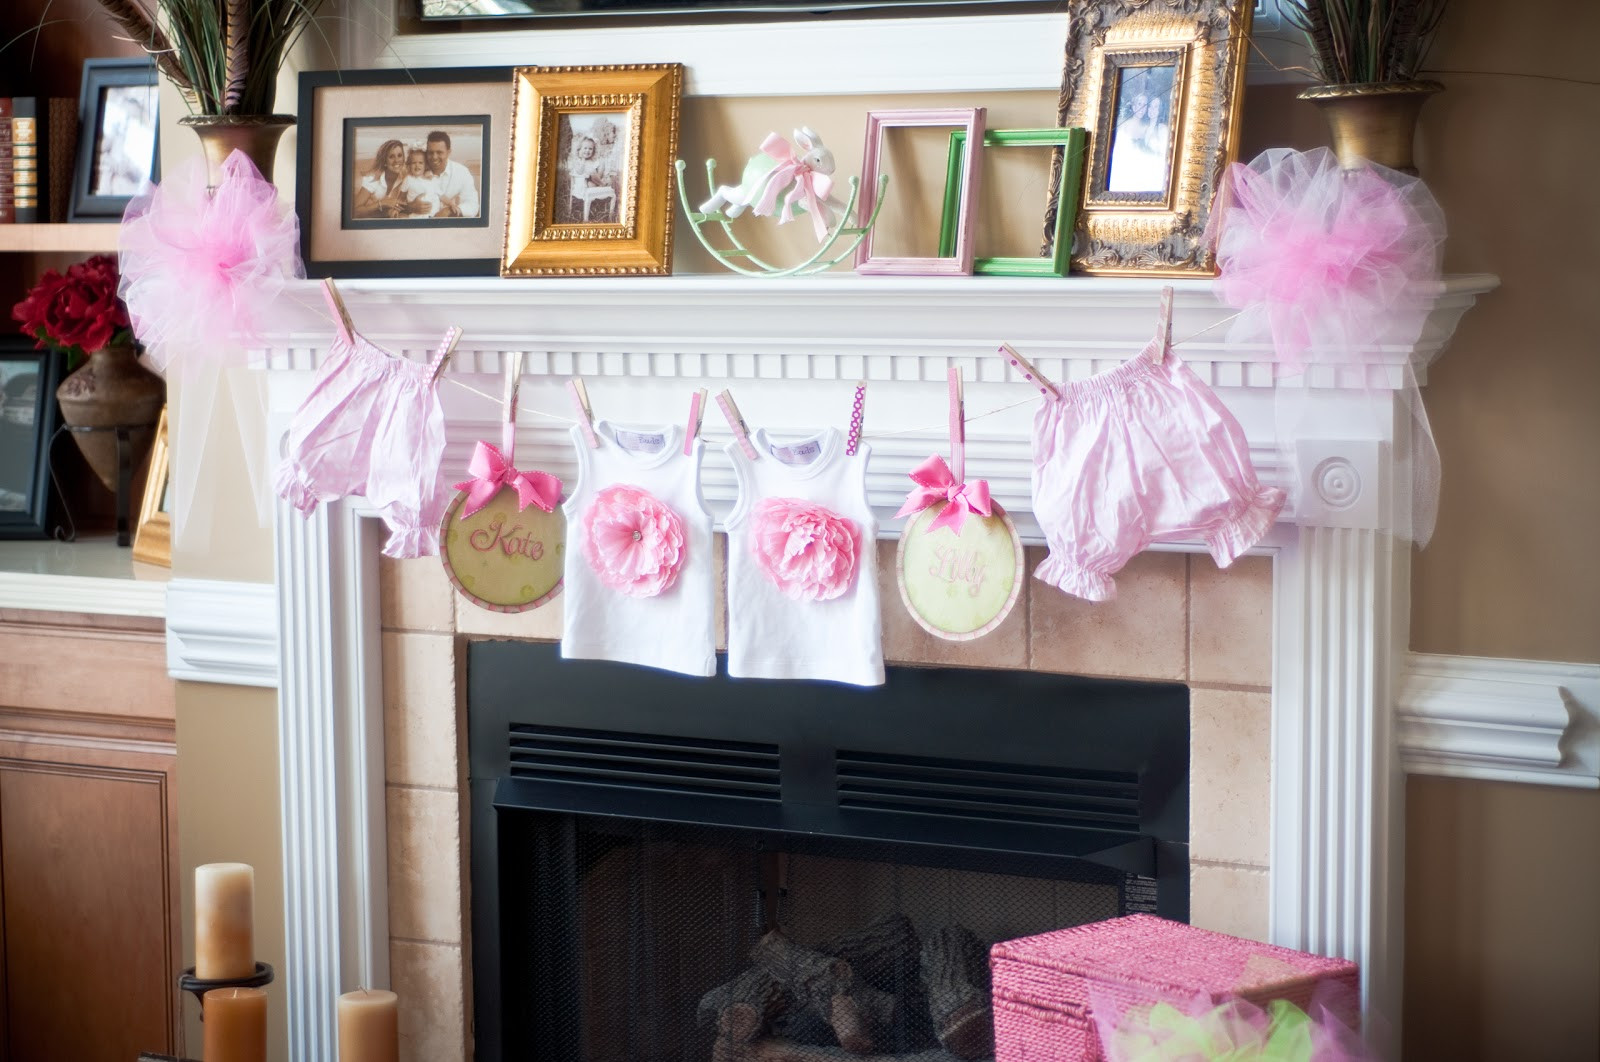 Baby Shower Decor Ideas For A Girl
 paws & re thread baby shower decorating ideas clothes